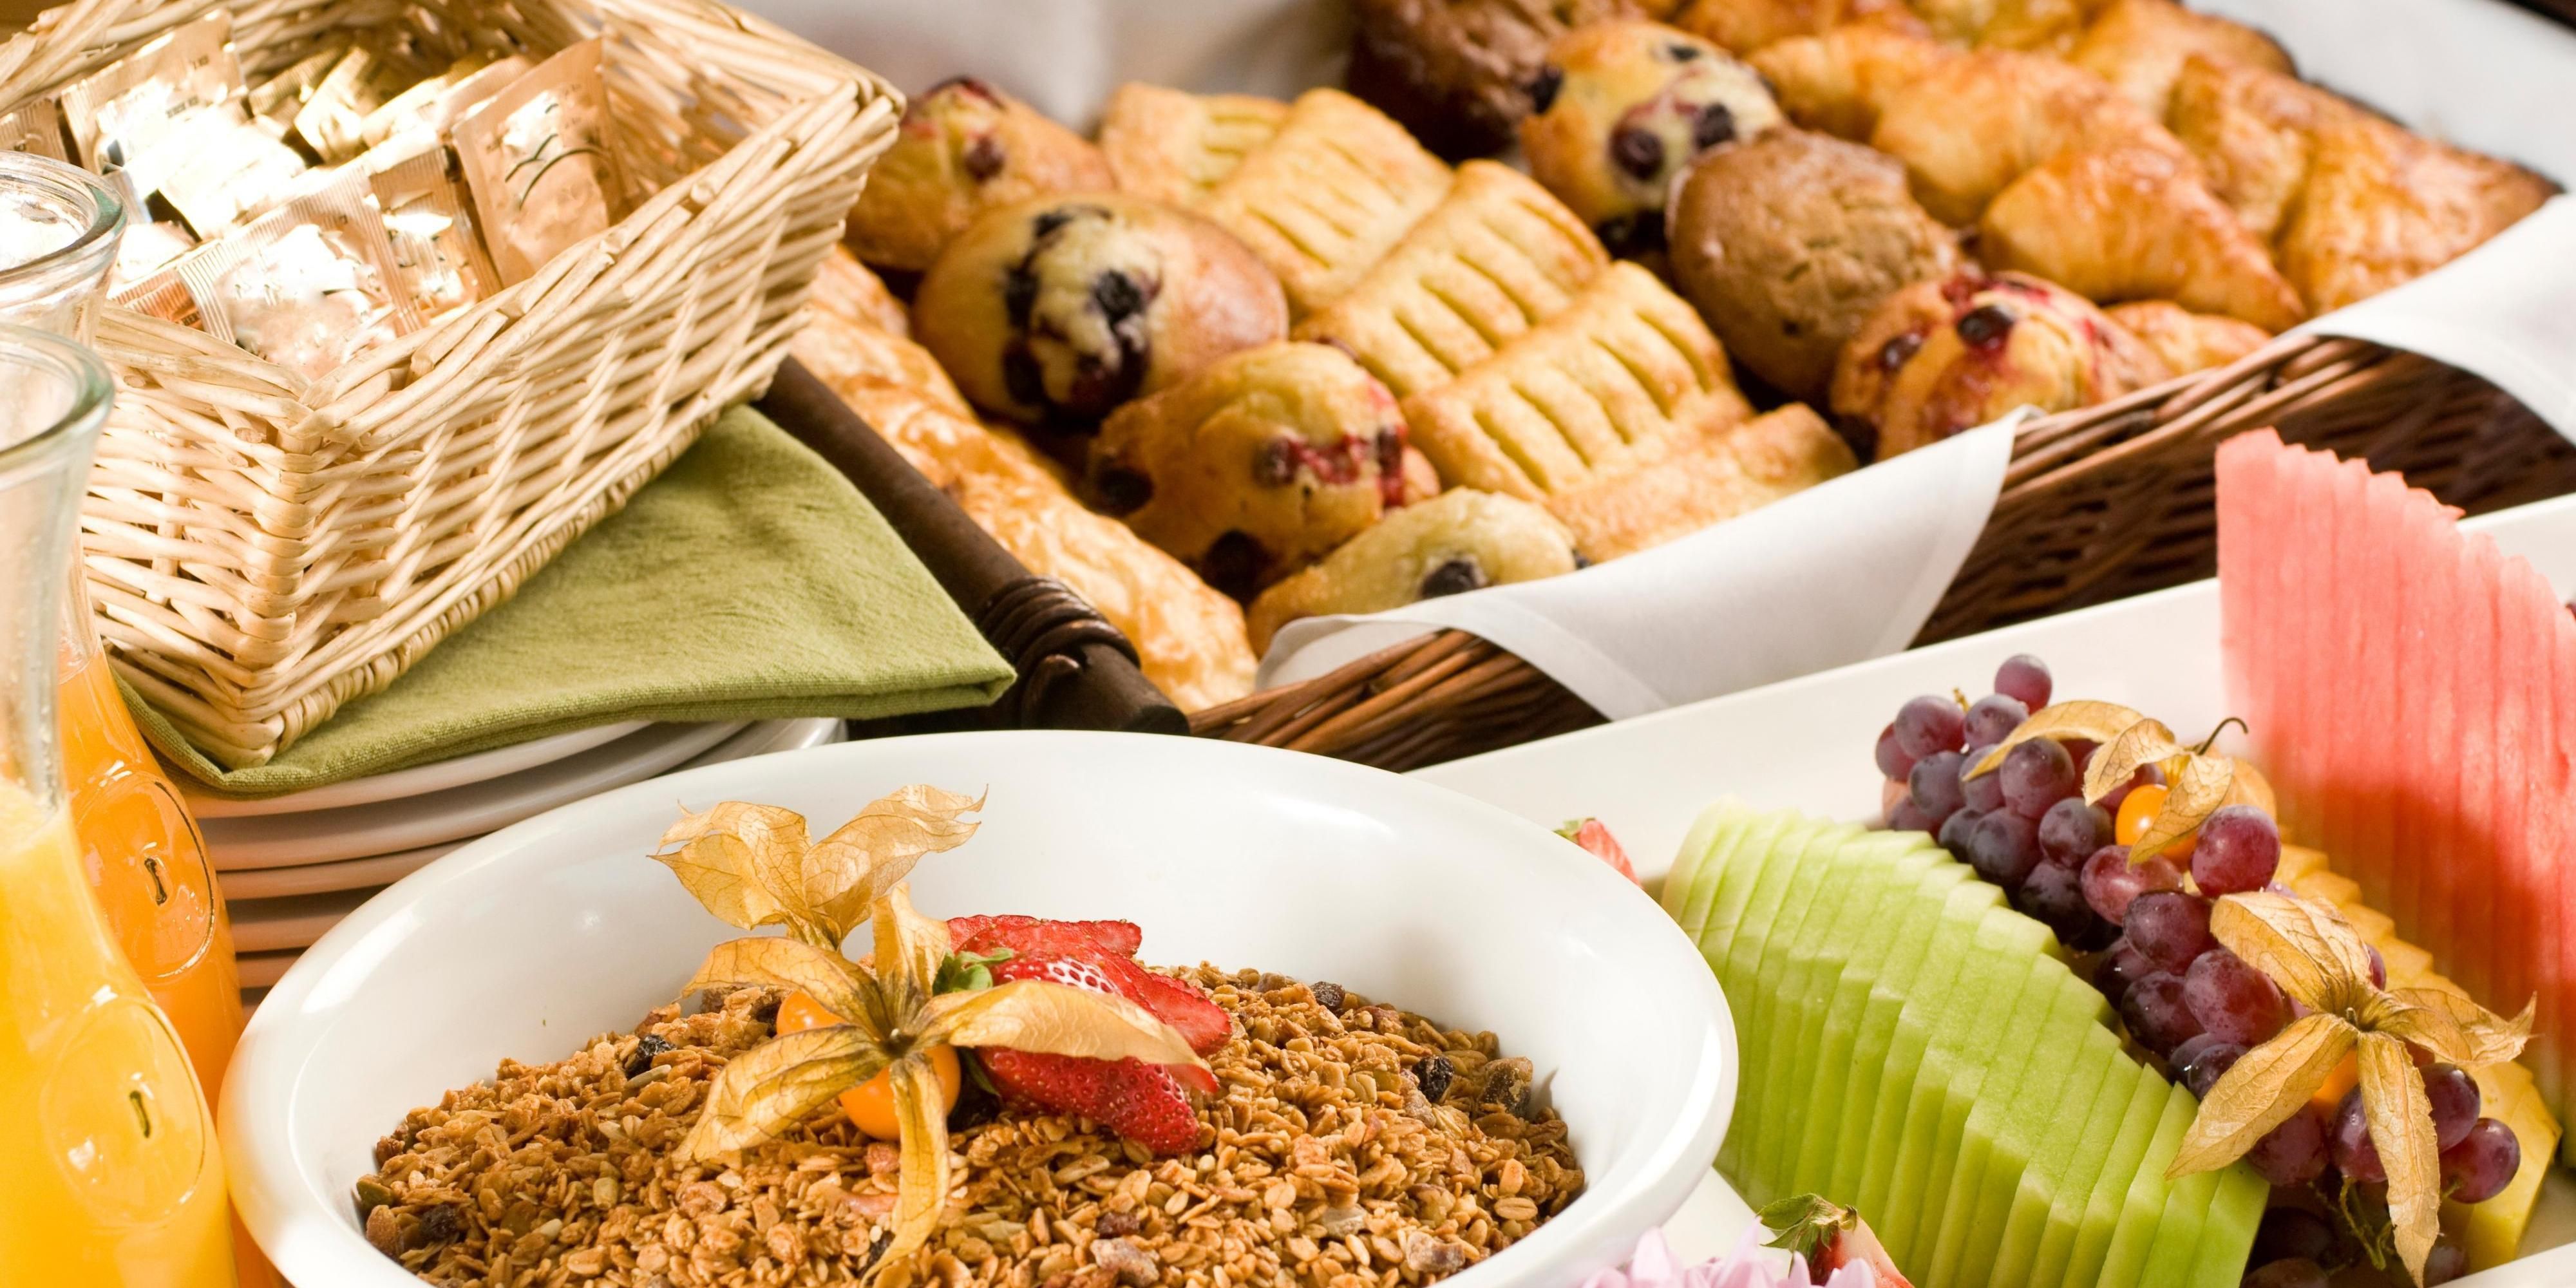 Our breakfasts offer a healthy and delicious selection